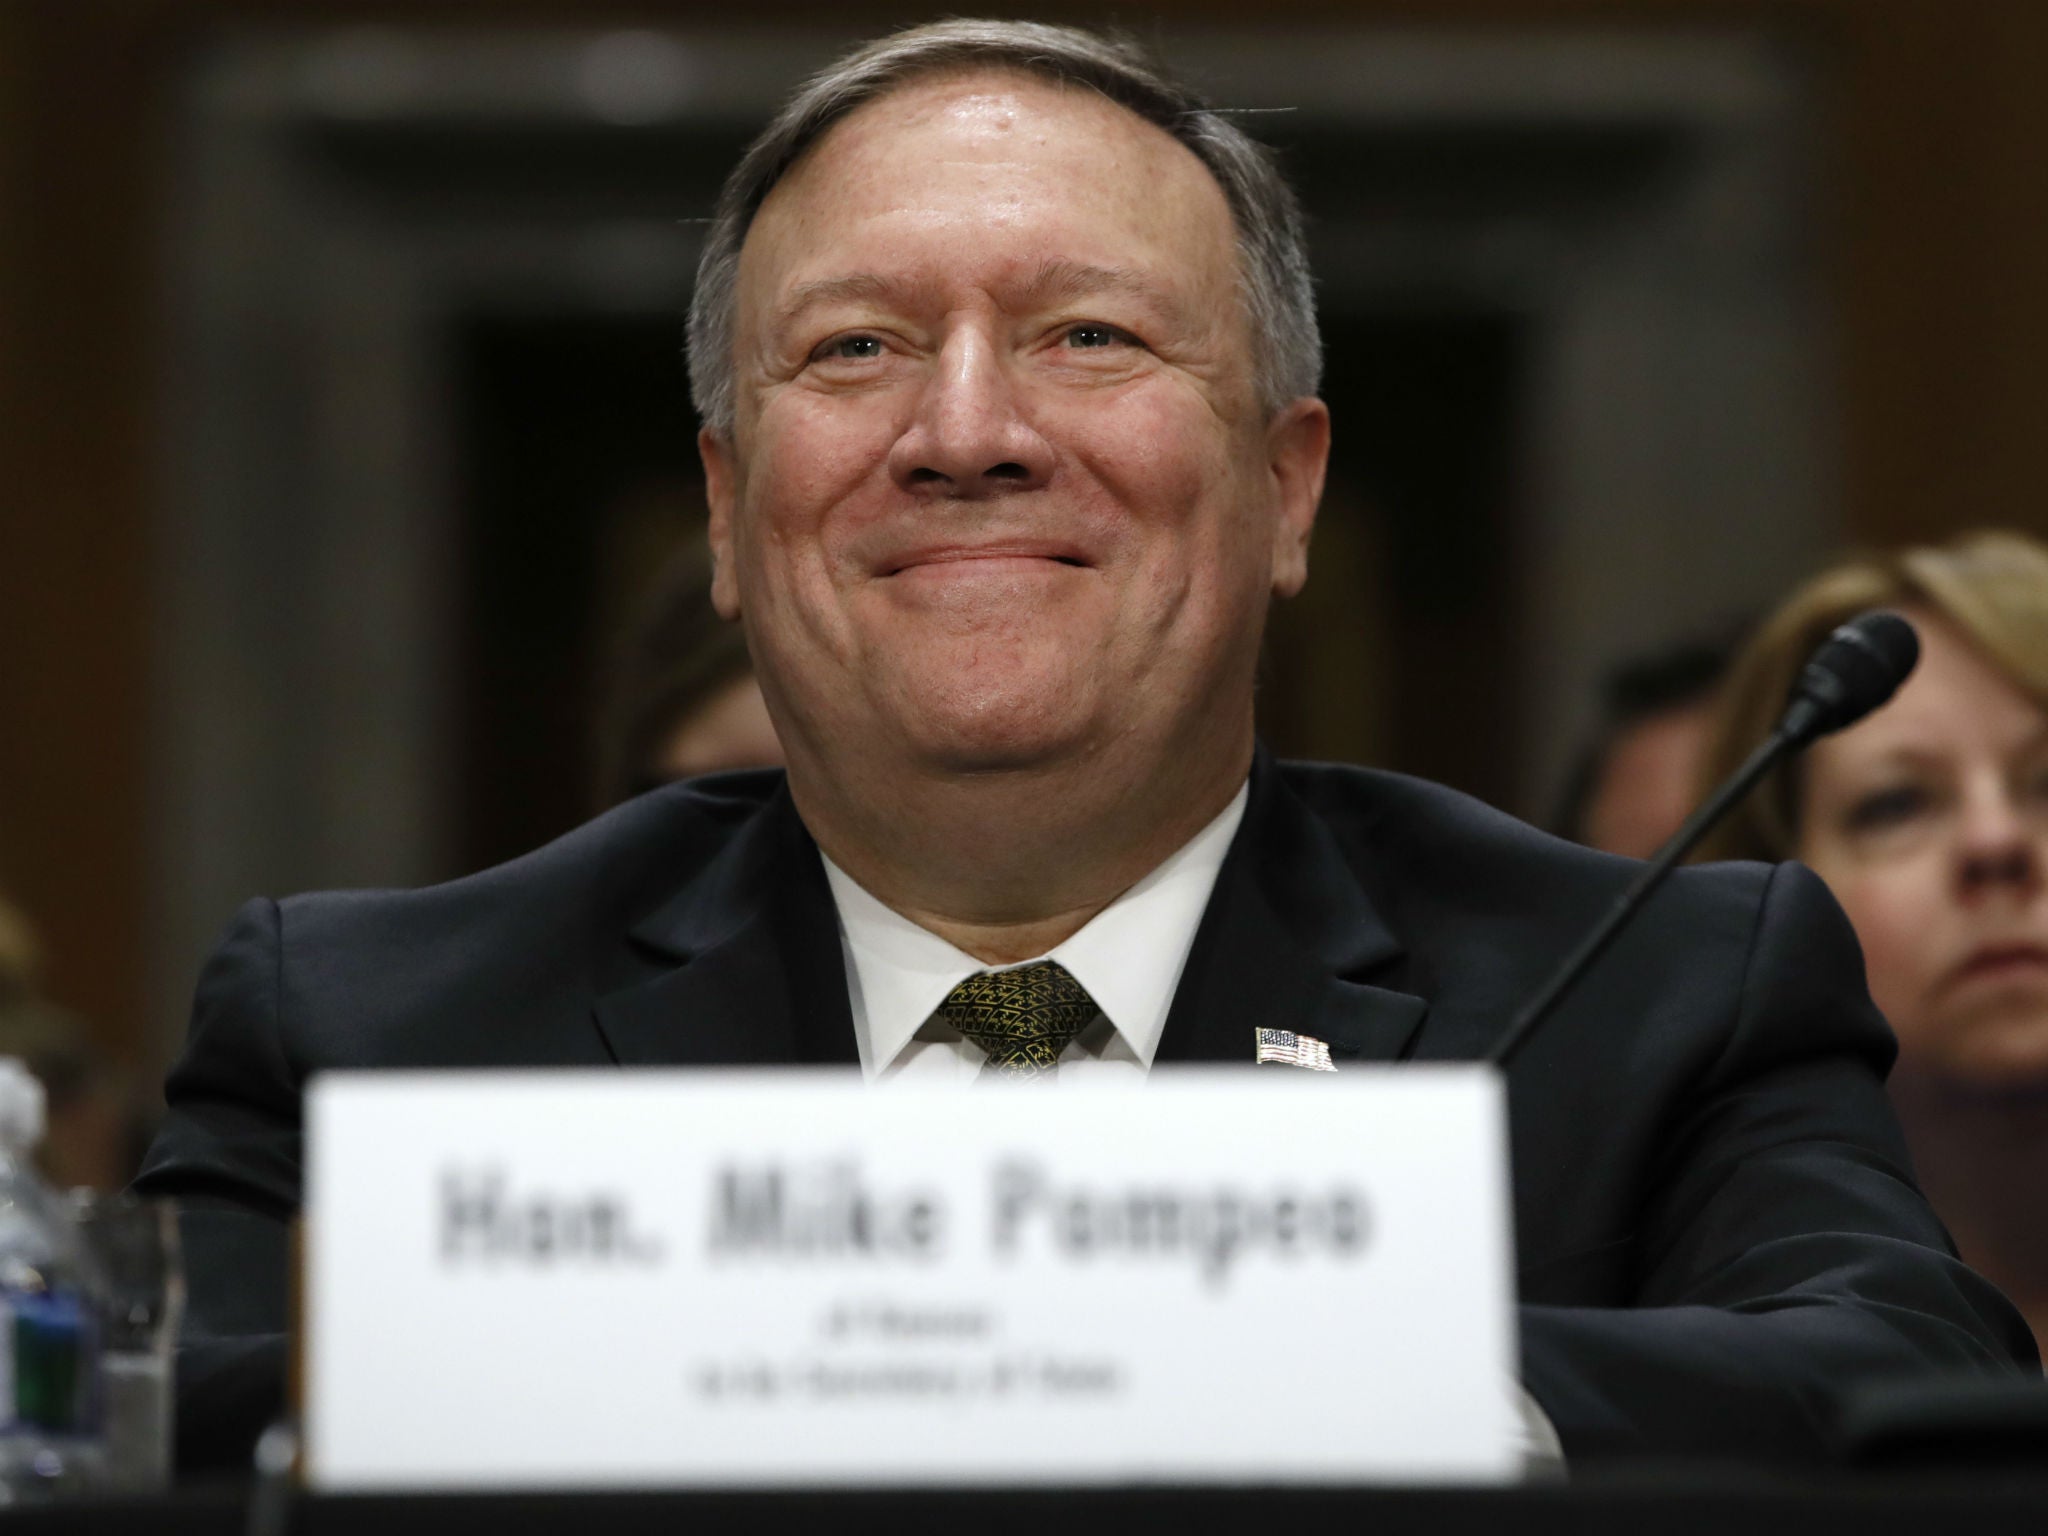 The current CIA director’s first tasks will be the North Korea summit and Iran agreement